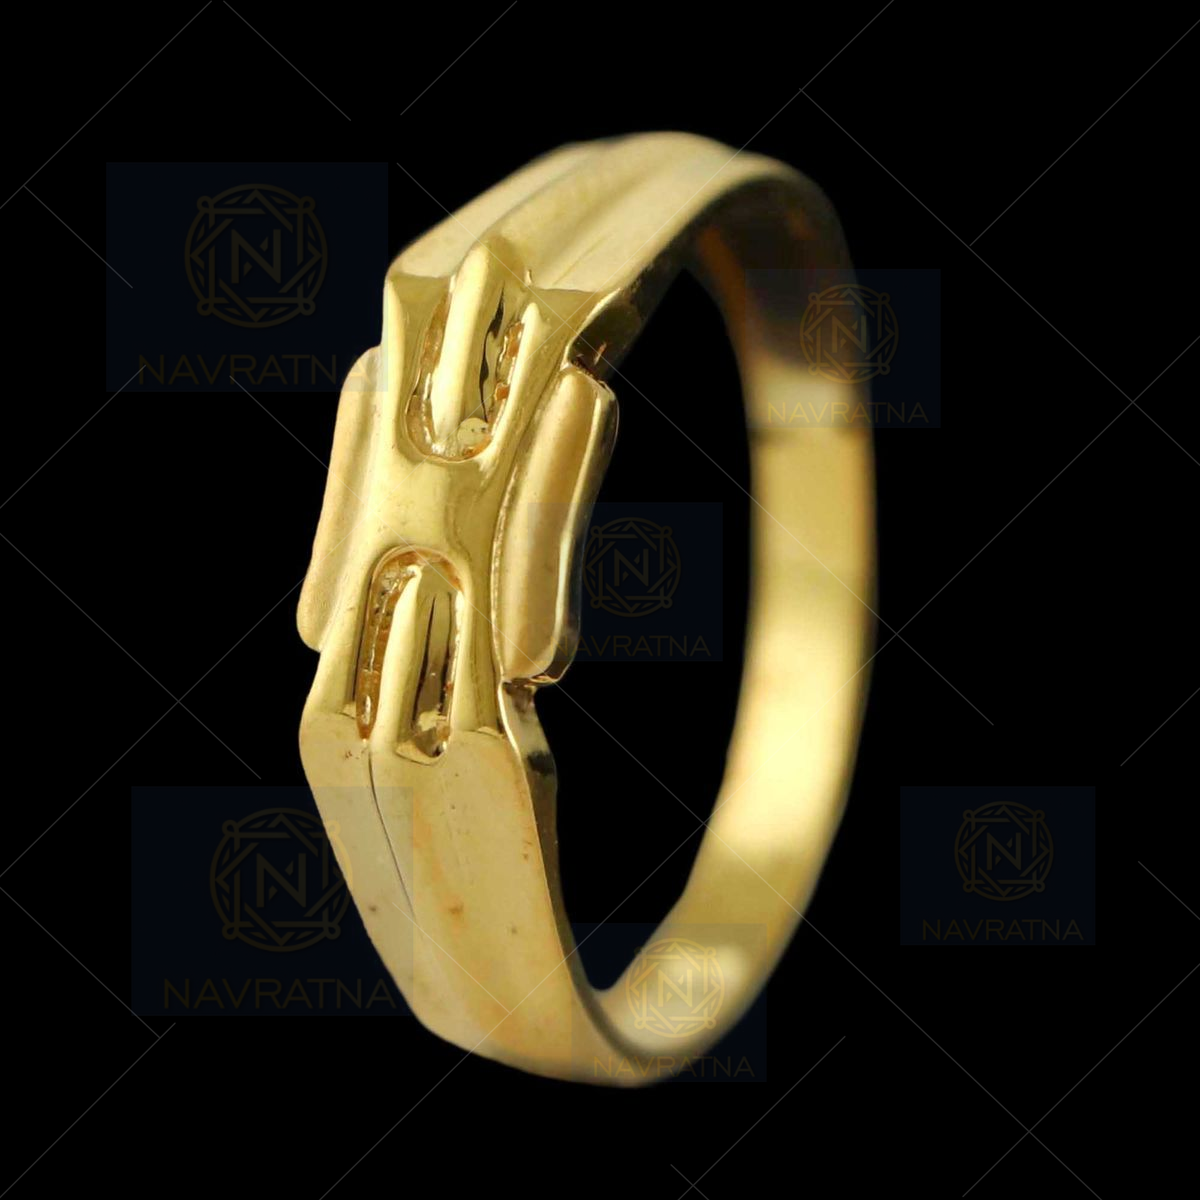 AA Direct Gold Supplier - #REALGOLD 🌷21k BAHRAIN GOLD RING 🌷PAWNABLE  /NASASANLA👍 🌷FREE DELIVERY (friday only) 🚚 🌷ALL FIXED PRICE👍  🌷STRICTLY NO RESERVATIONS👍 🌷NO CANCELLATION👍 | Facebook